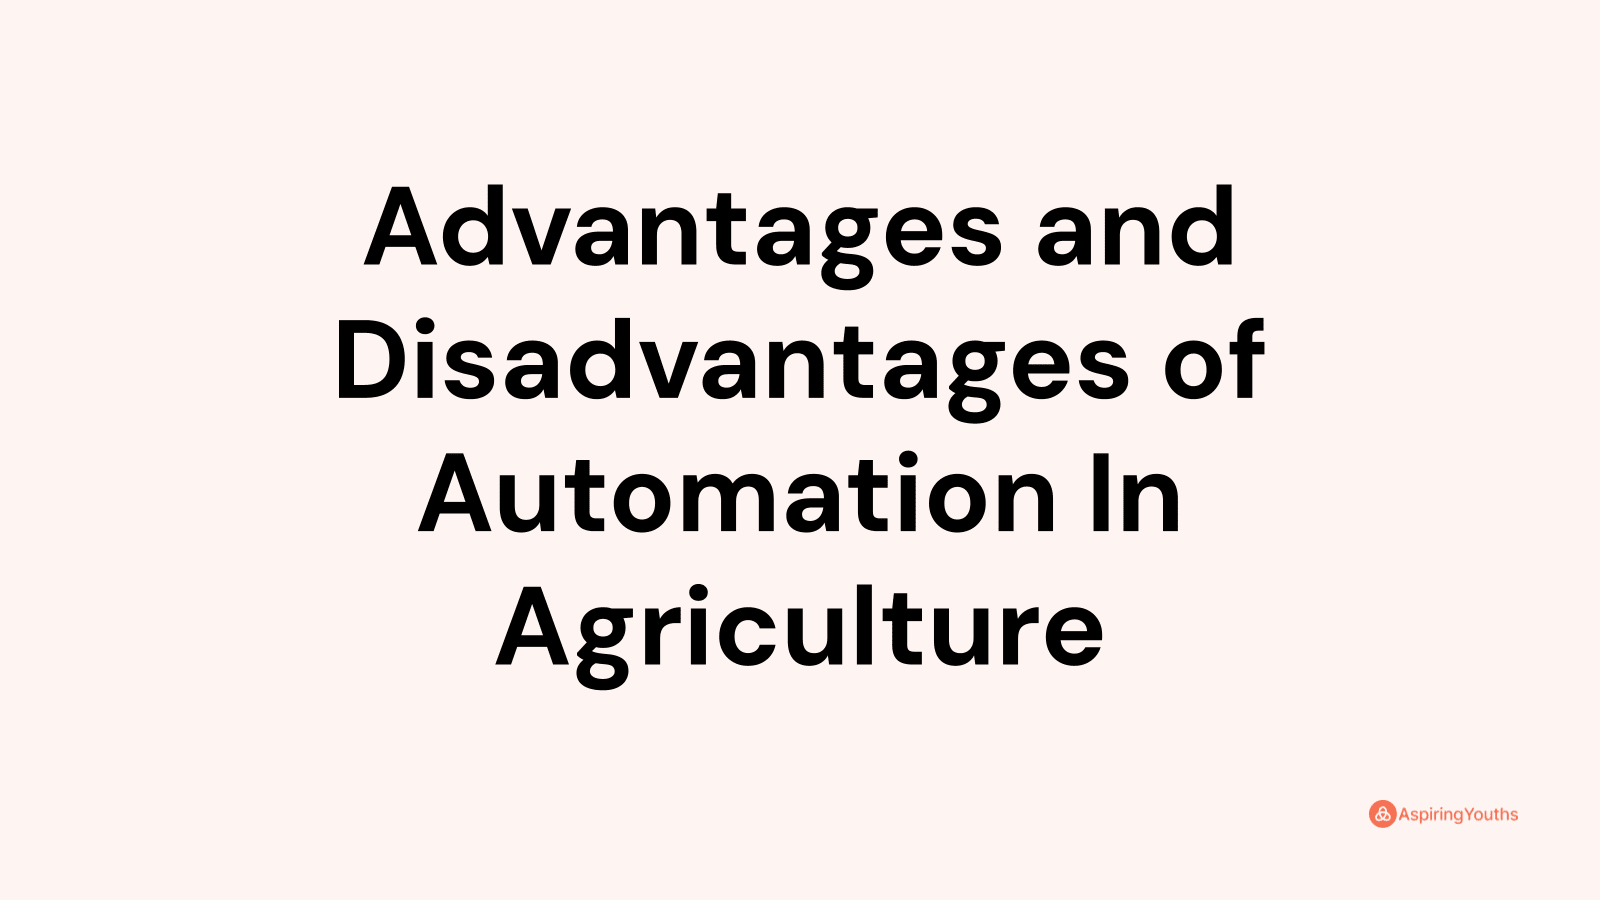 Advantages and disadvantages of Automation In Agriculture